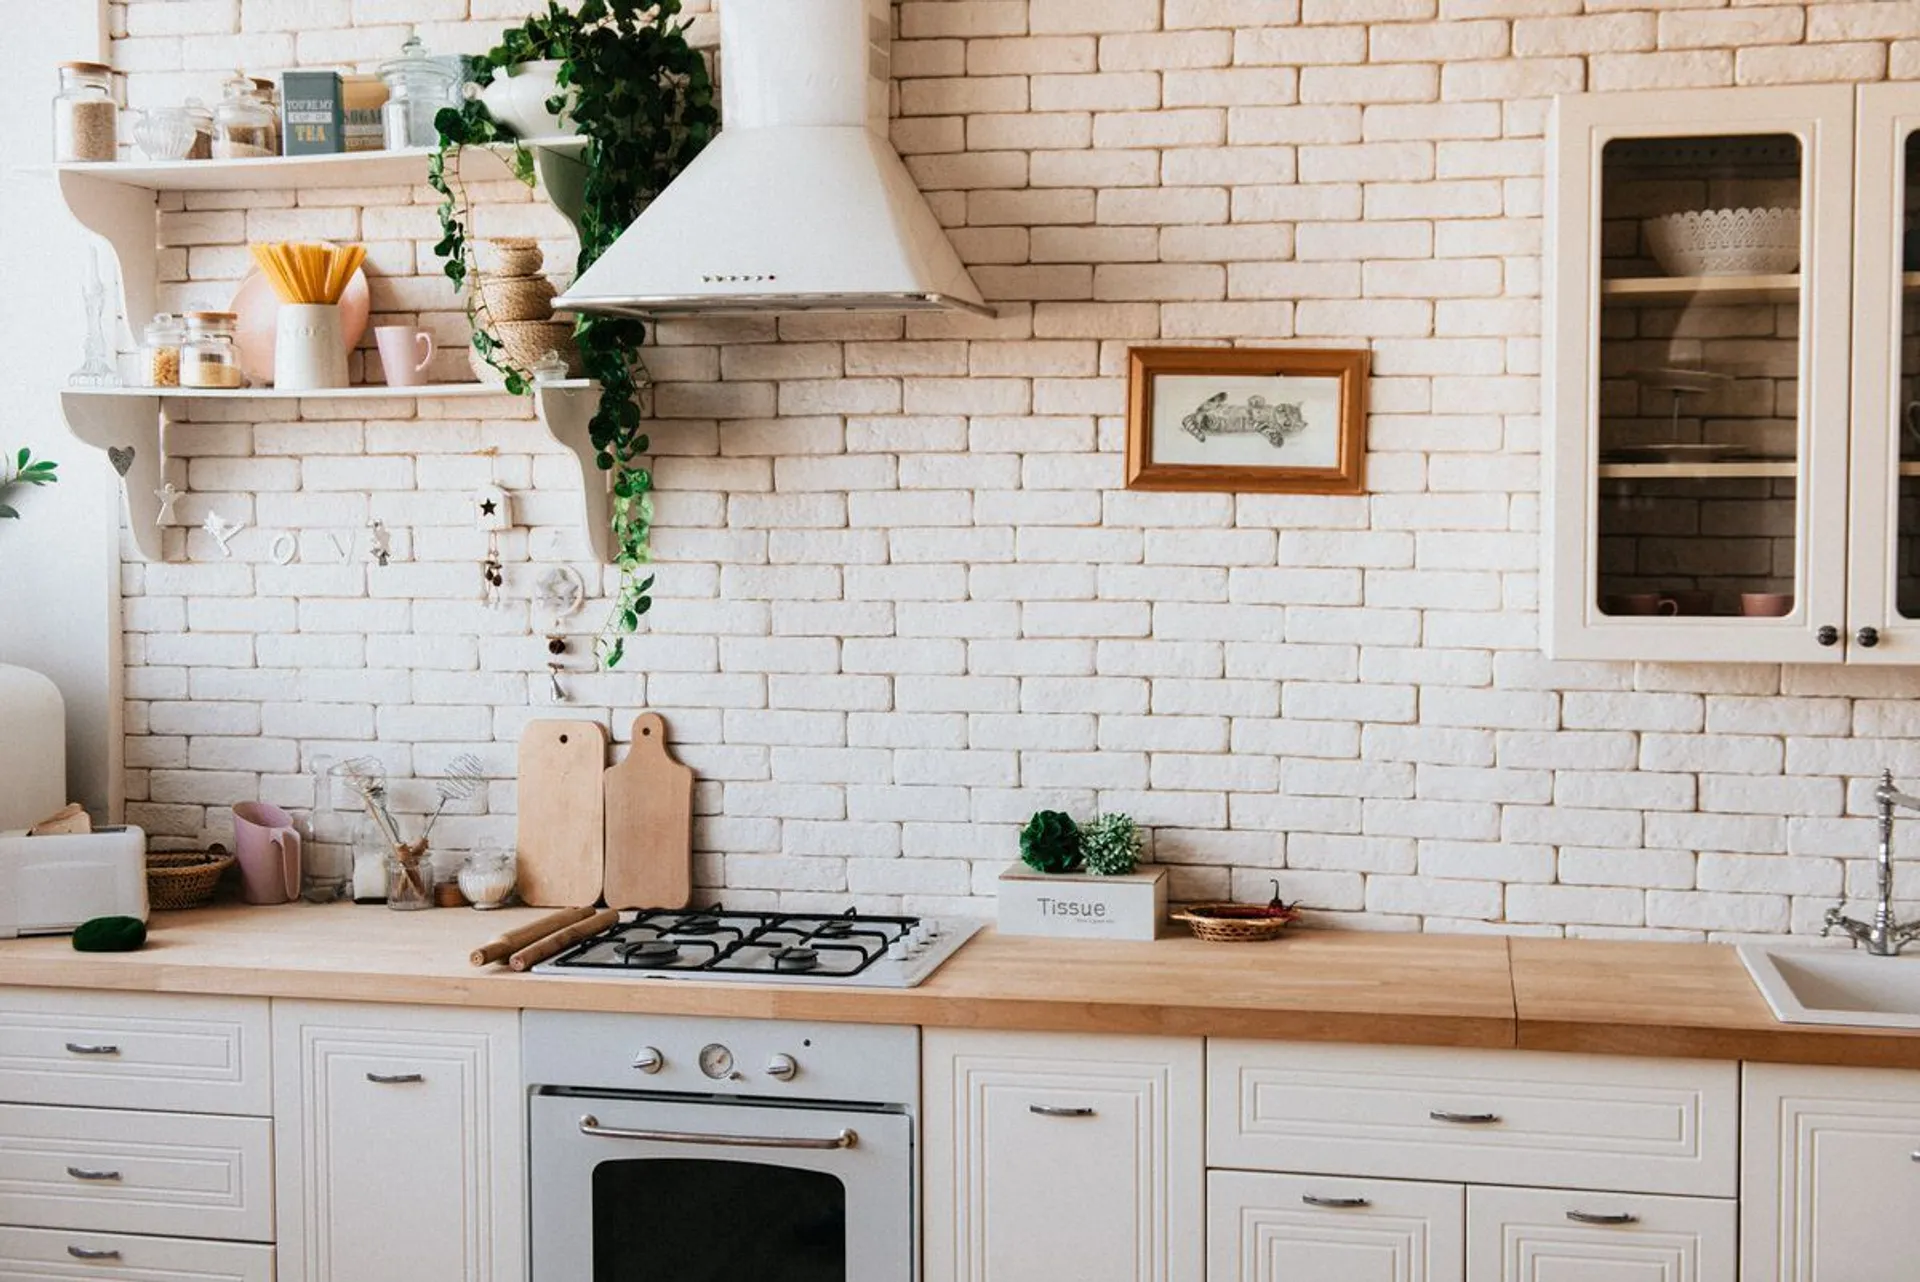 Renovating your Kitchen? Here are 3 stores you need to visit